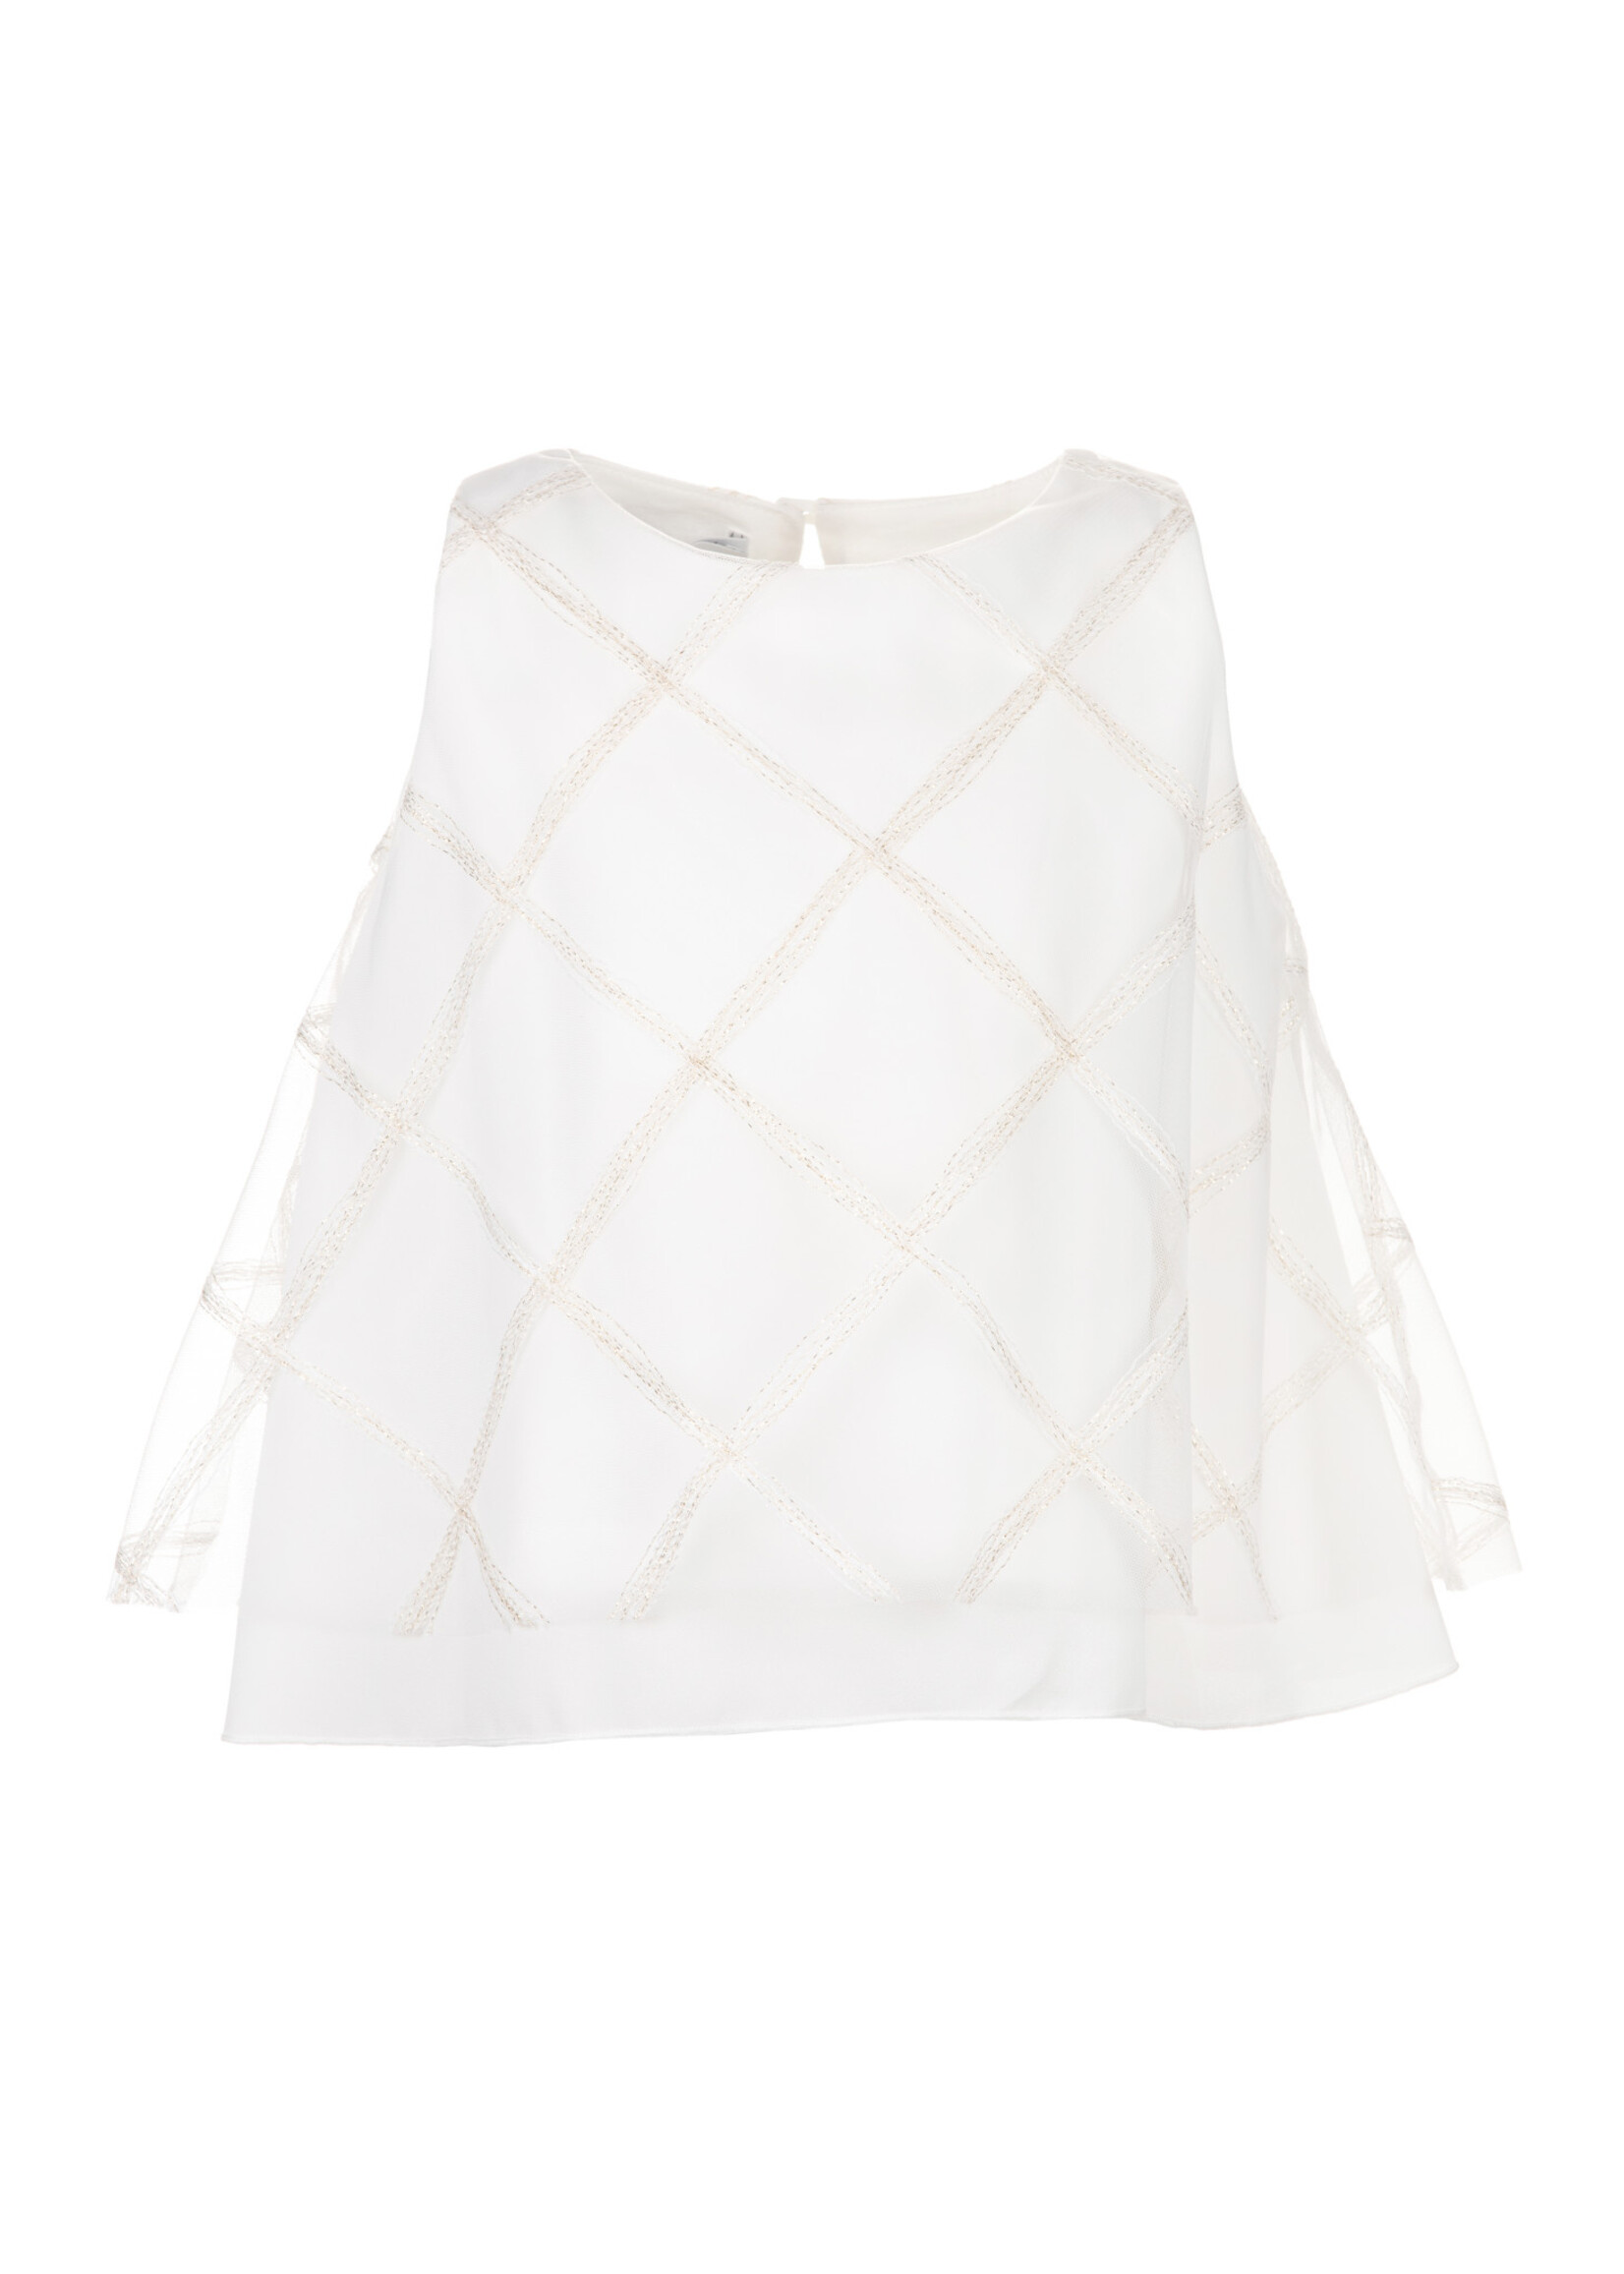 Elsy Elsy couture blouse offwhite/gold - violante 4706